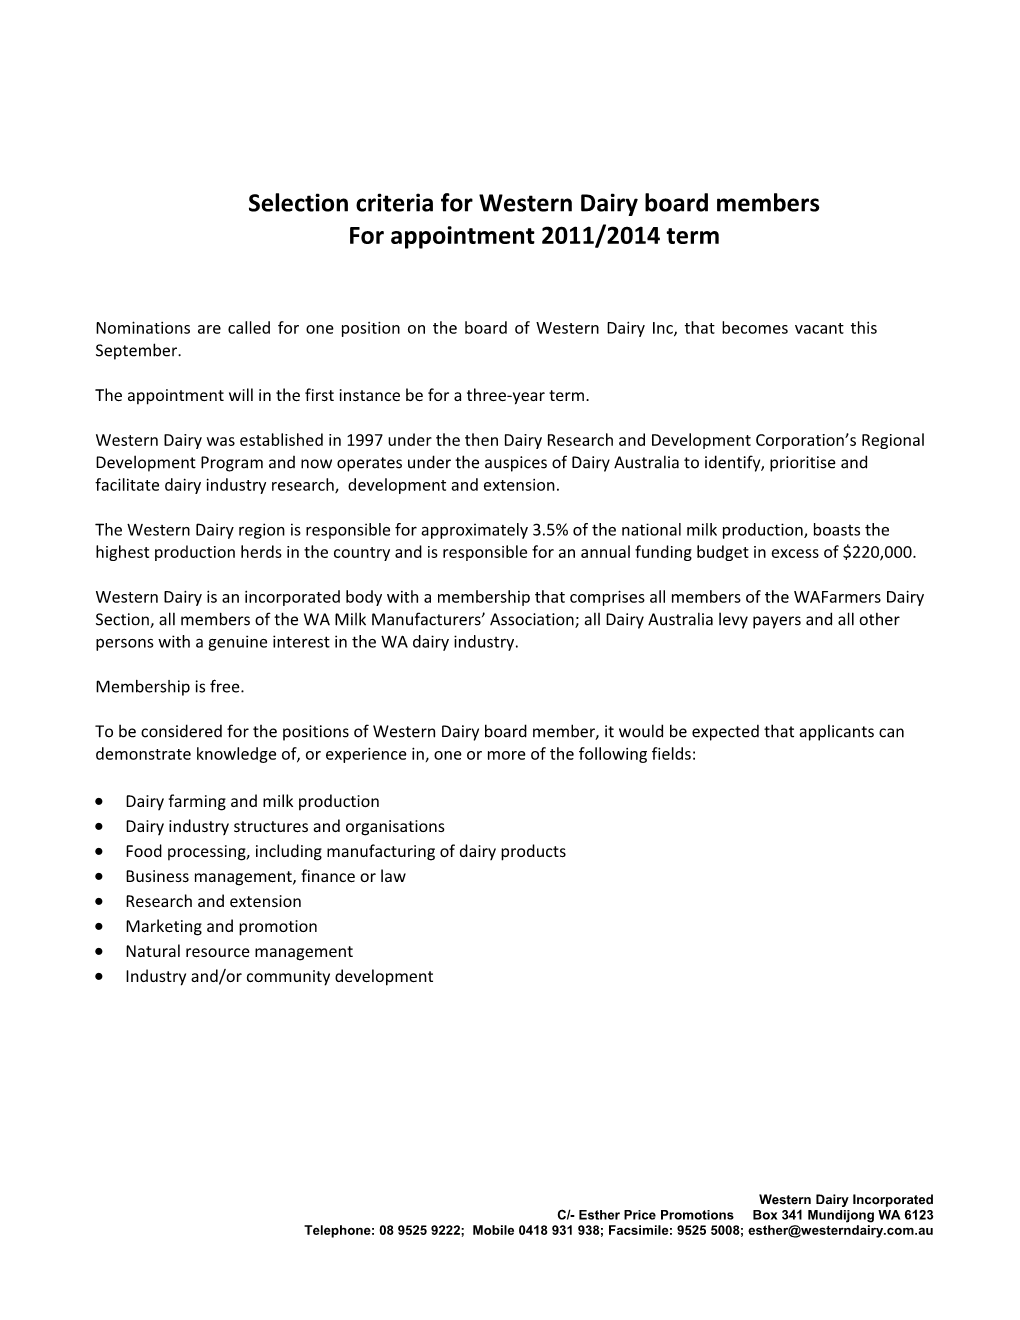 Selection Criteria for Western Dairy Board Members